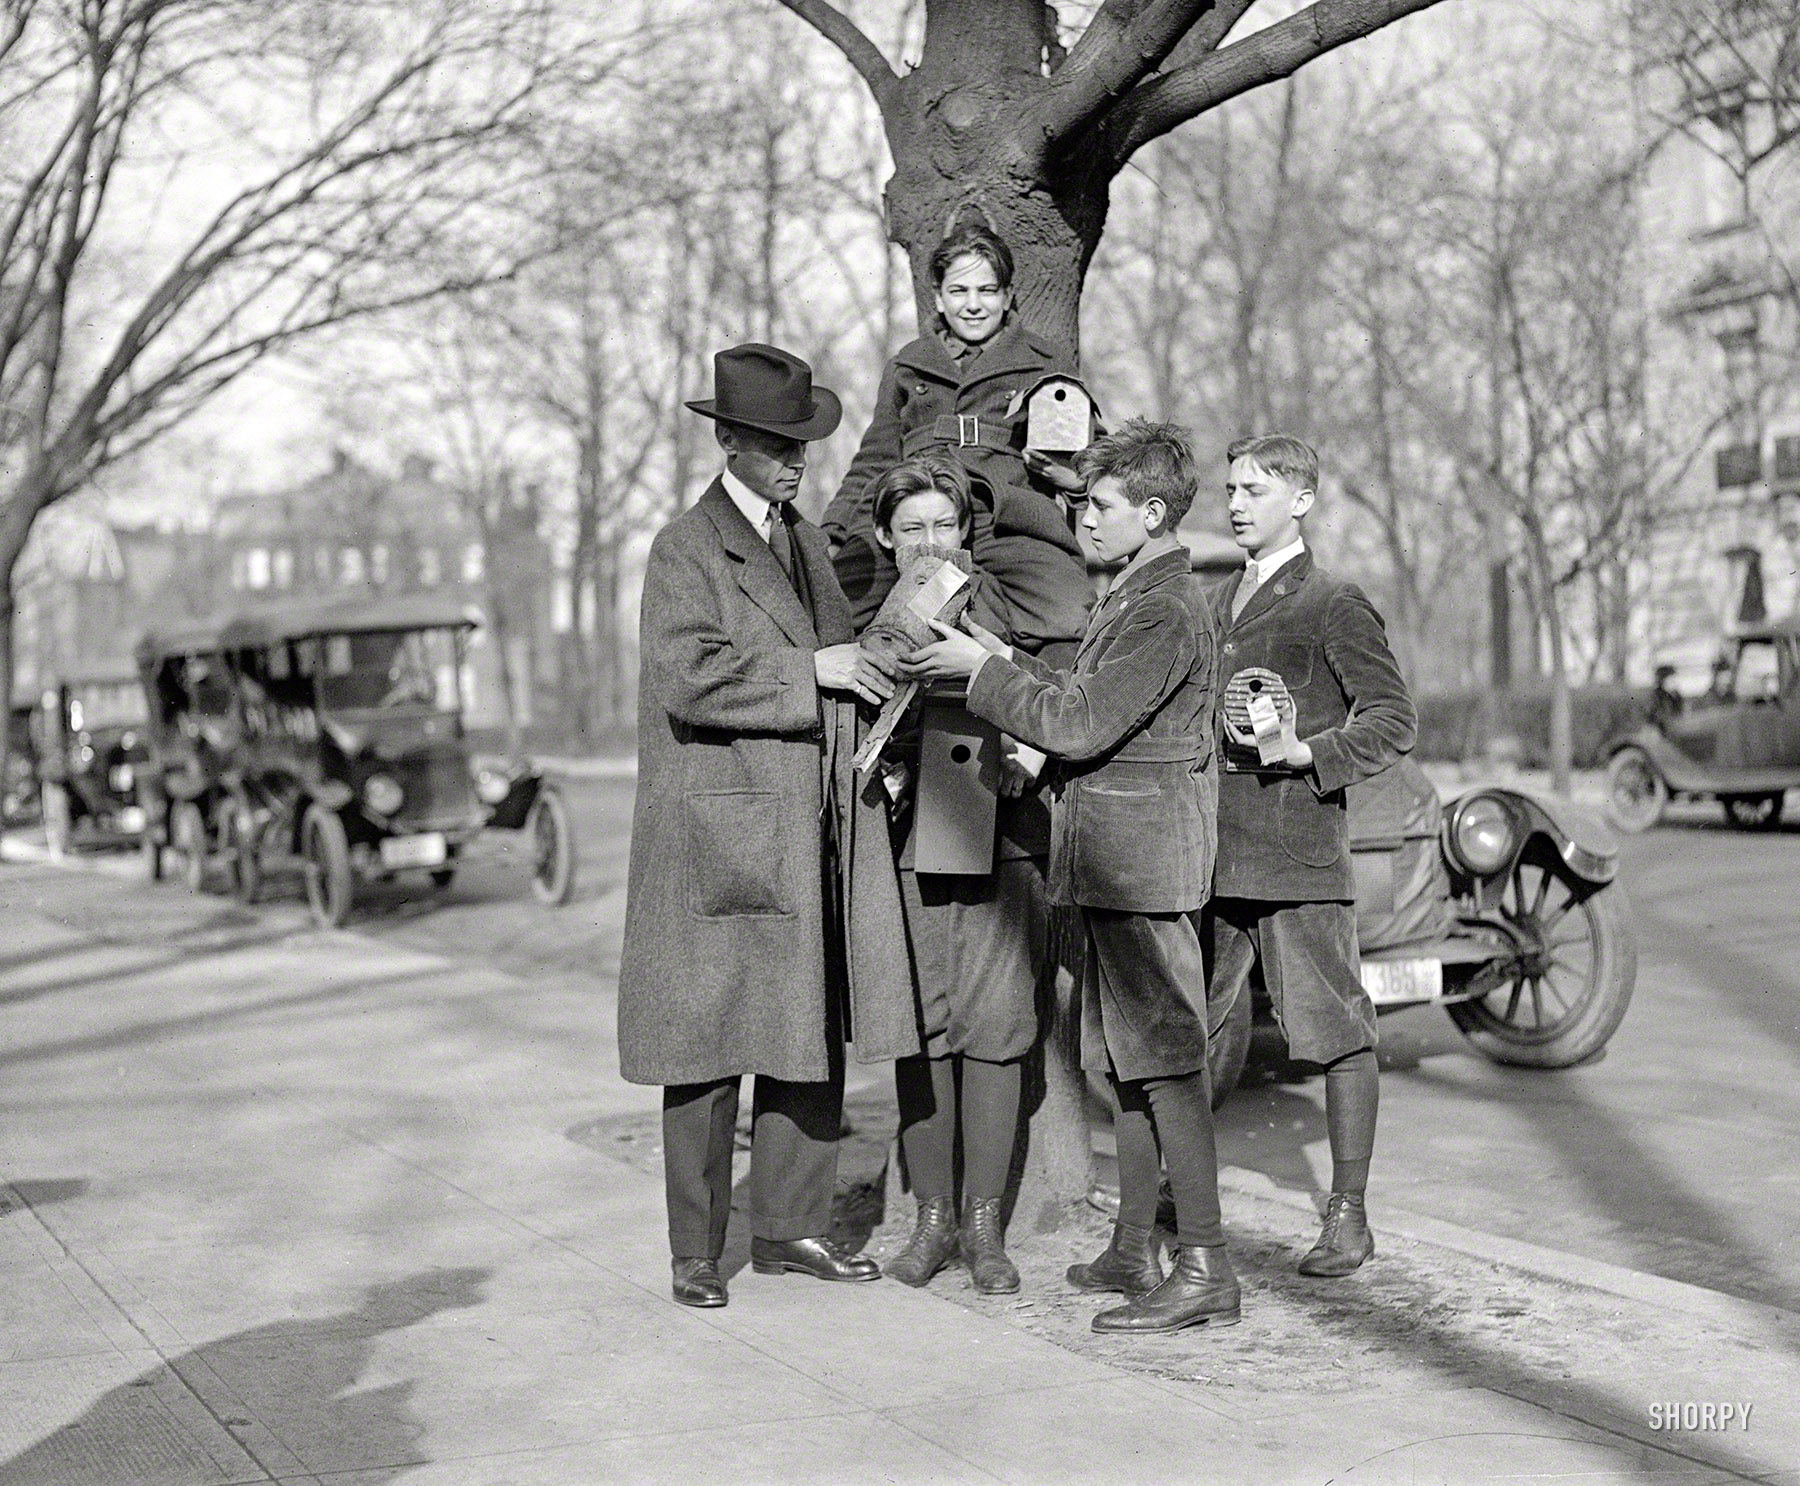 January 20, 1921. Washington, D.C. "American Forestry Association bird house contest." Back when ornithology was something a boy picked up on the streets. National Photo Company Collection glass negative. View full size.